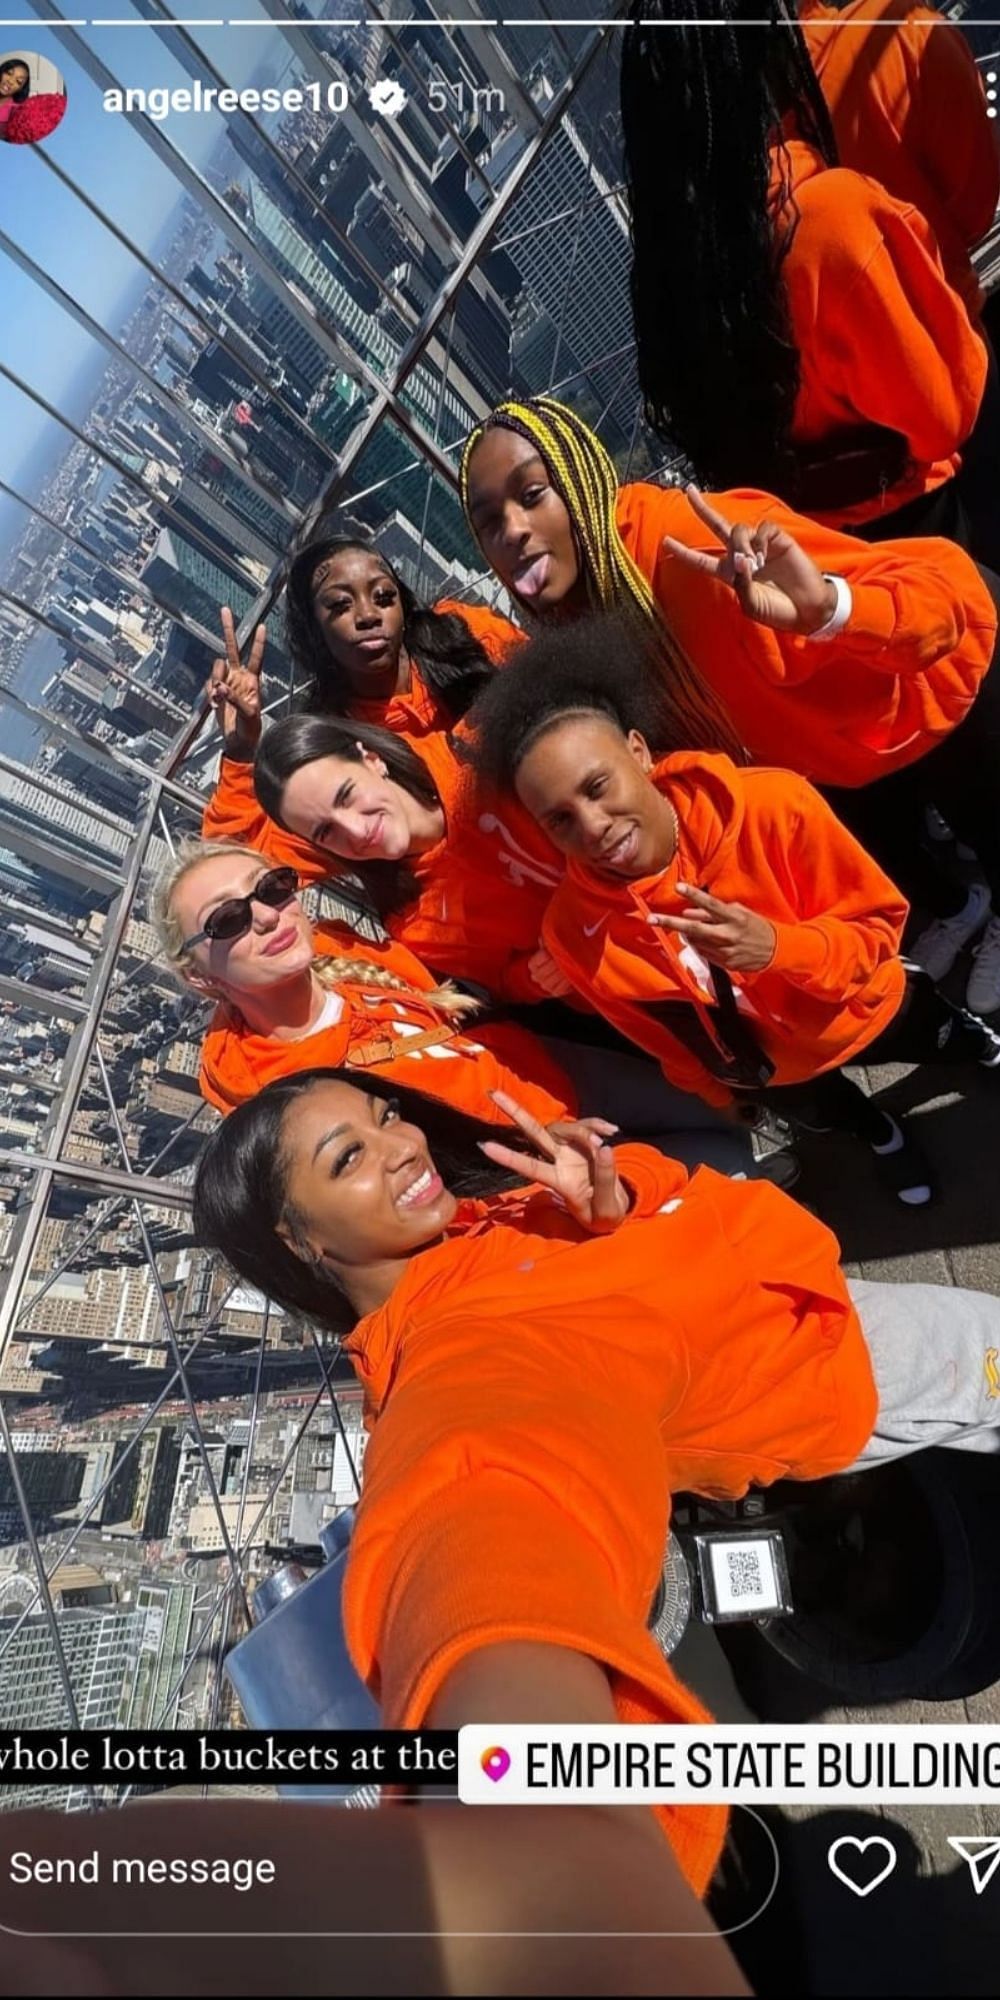 Angel Reese and the group enjoying at the Empire State Building.